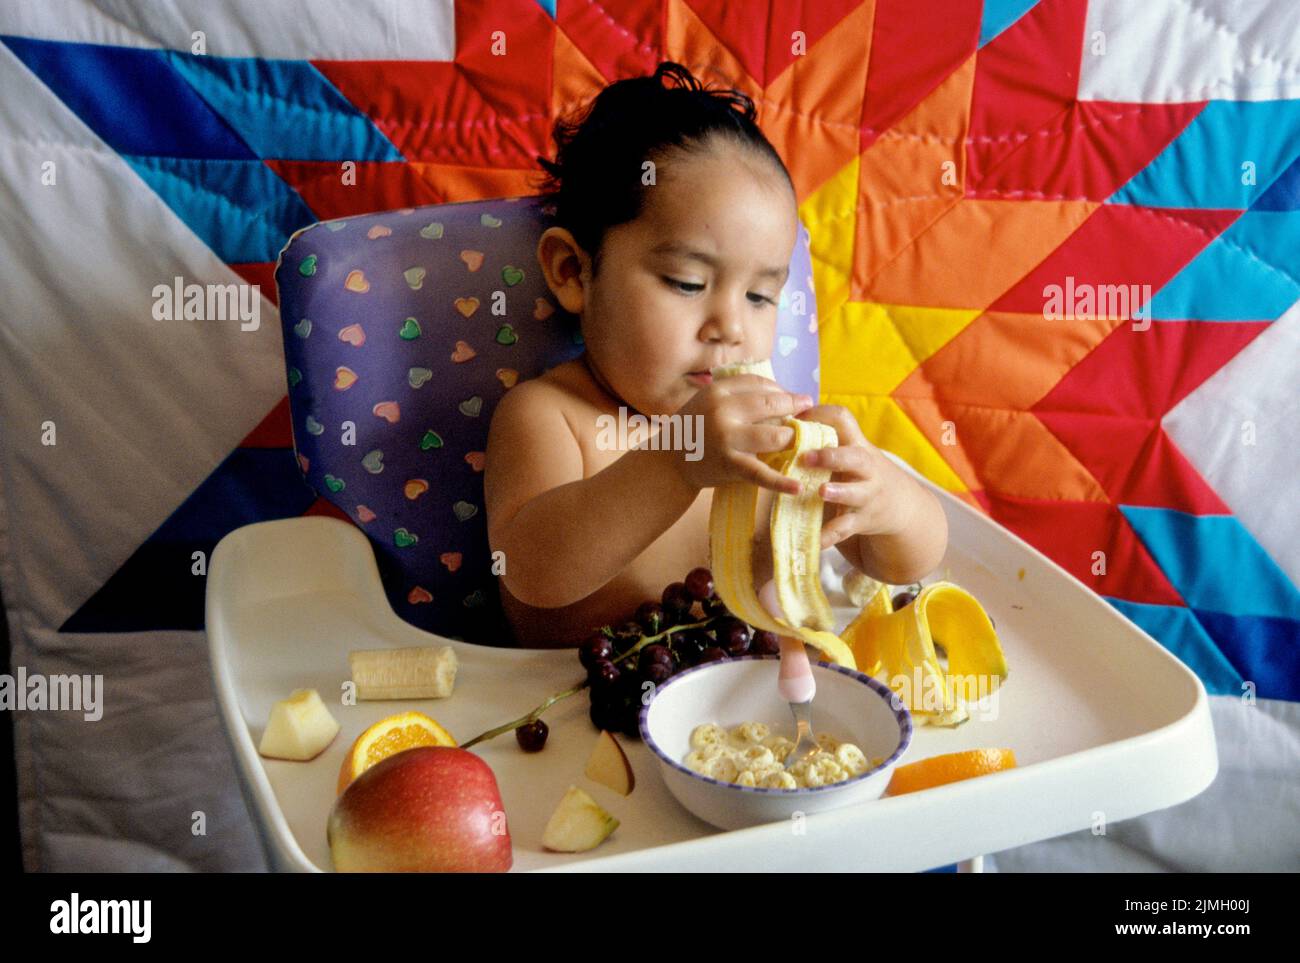 of fruit and cereal while sitting in a high chair. Fort Hall Idaho Stock Photo